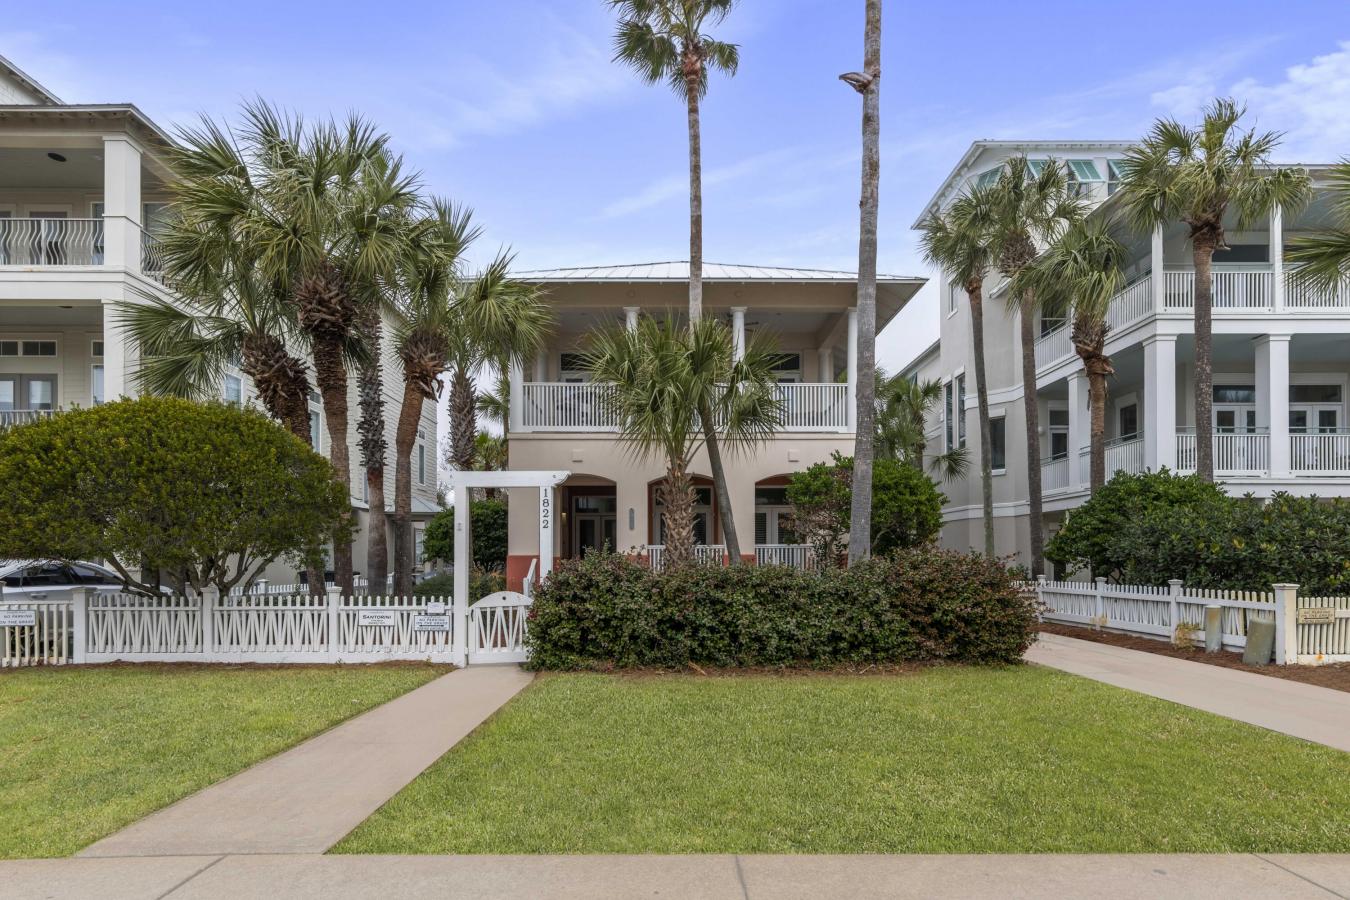 1822 Scenic Gulf Drive, Miramar Beach, Florida, 32550, United States, 4 Bedrooms Bedrooms, ,1 BathroomBathrooms,Residential,For Sale,1822 Scenic Gulf Drive,1468113